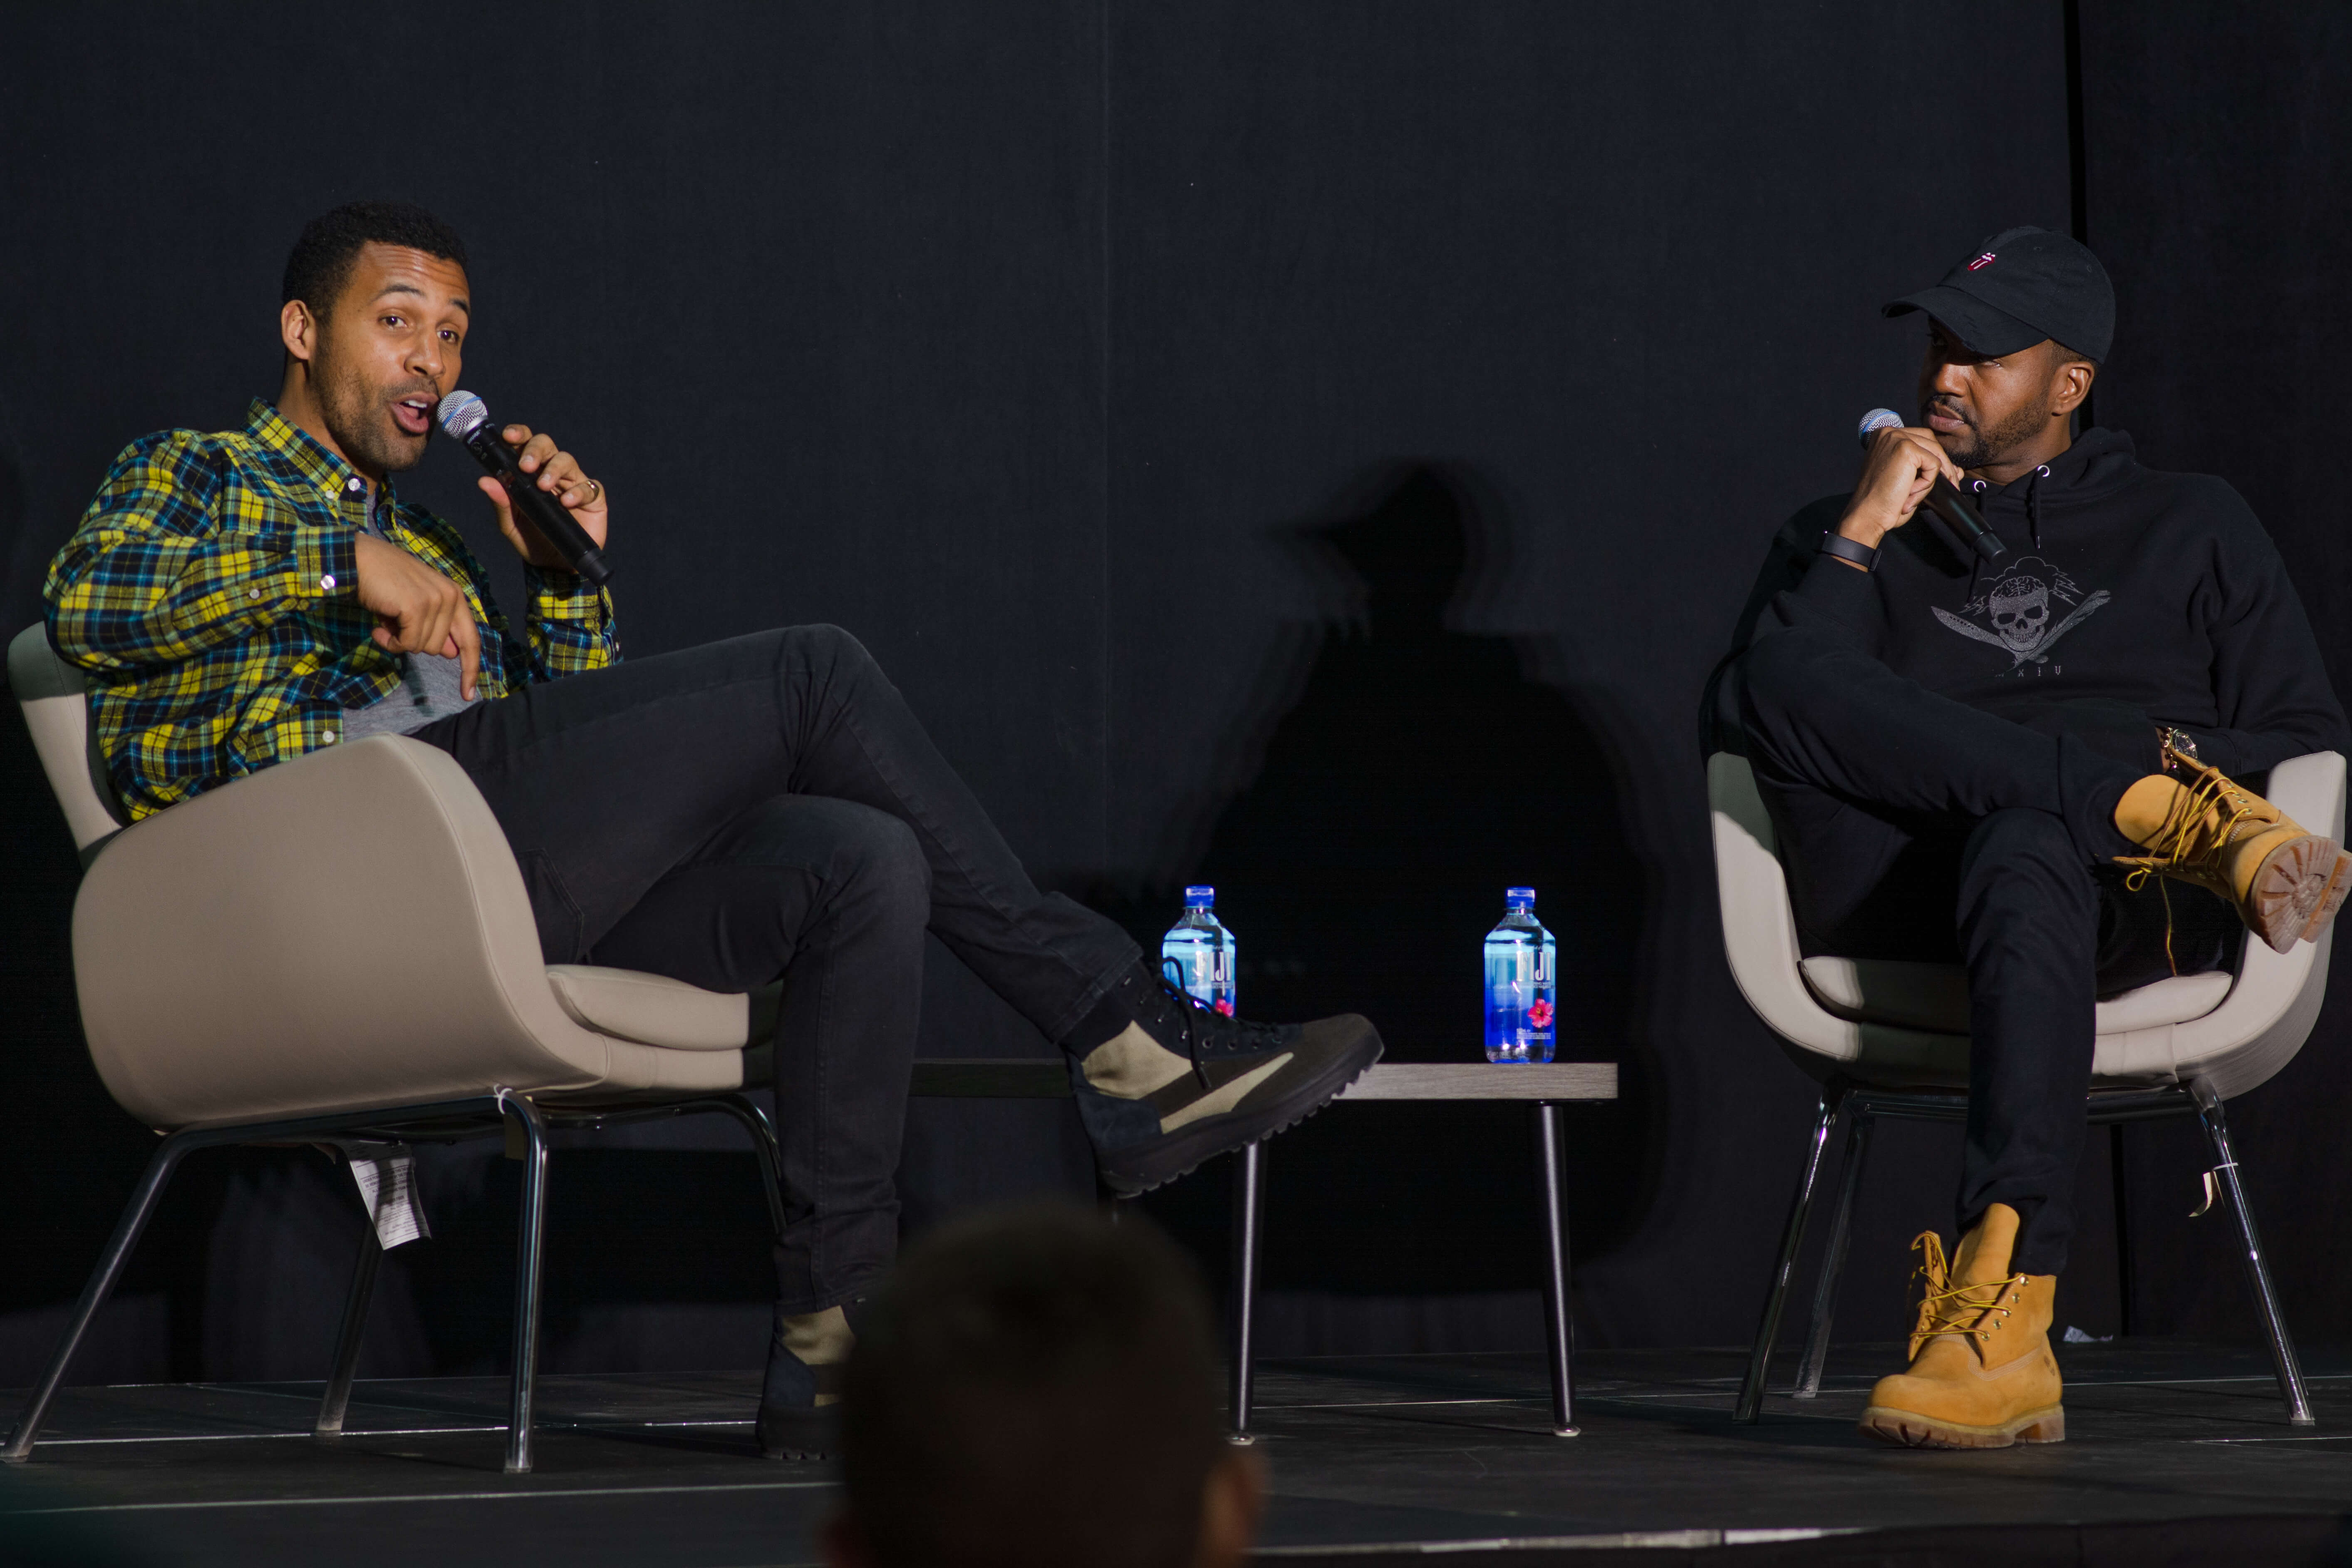 Matte Babel and Van Lathan discuss on stage at Real Talks